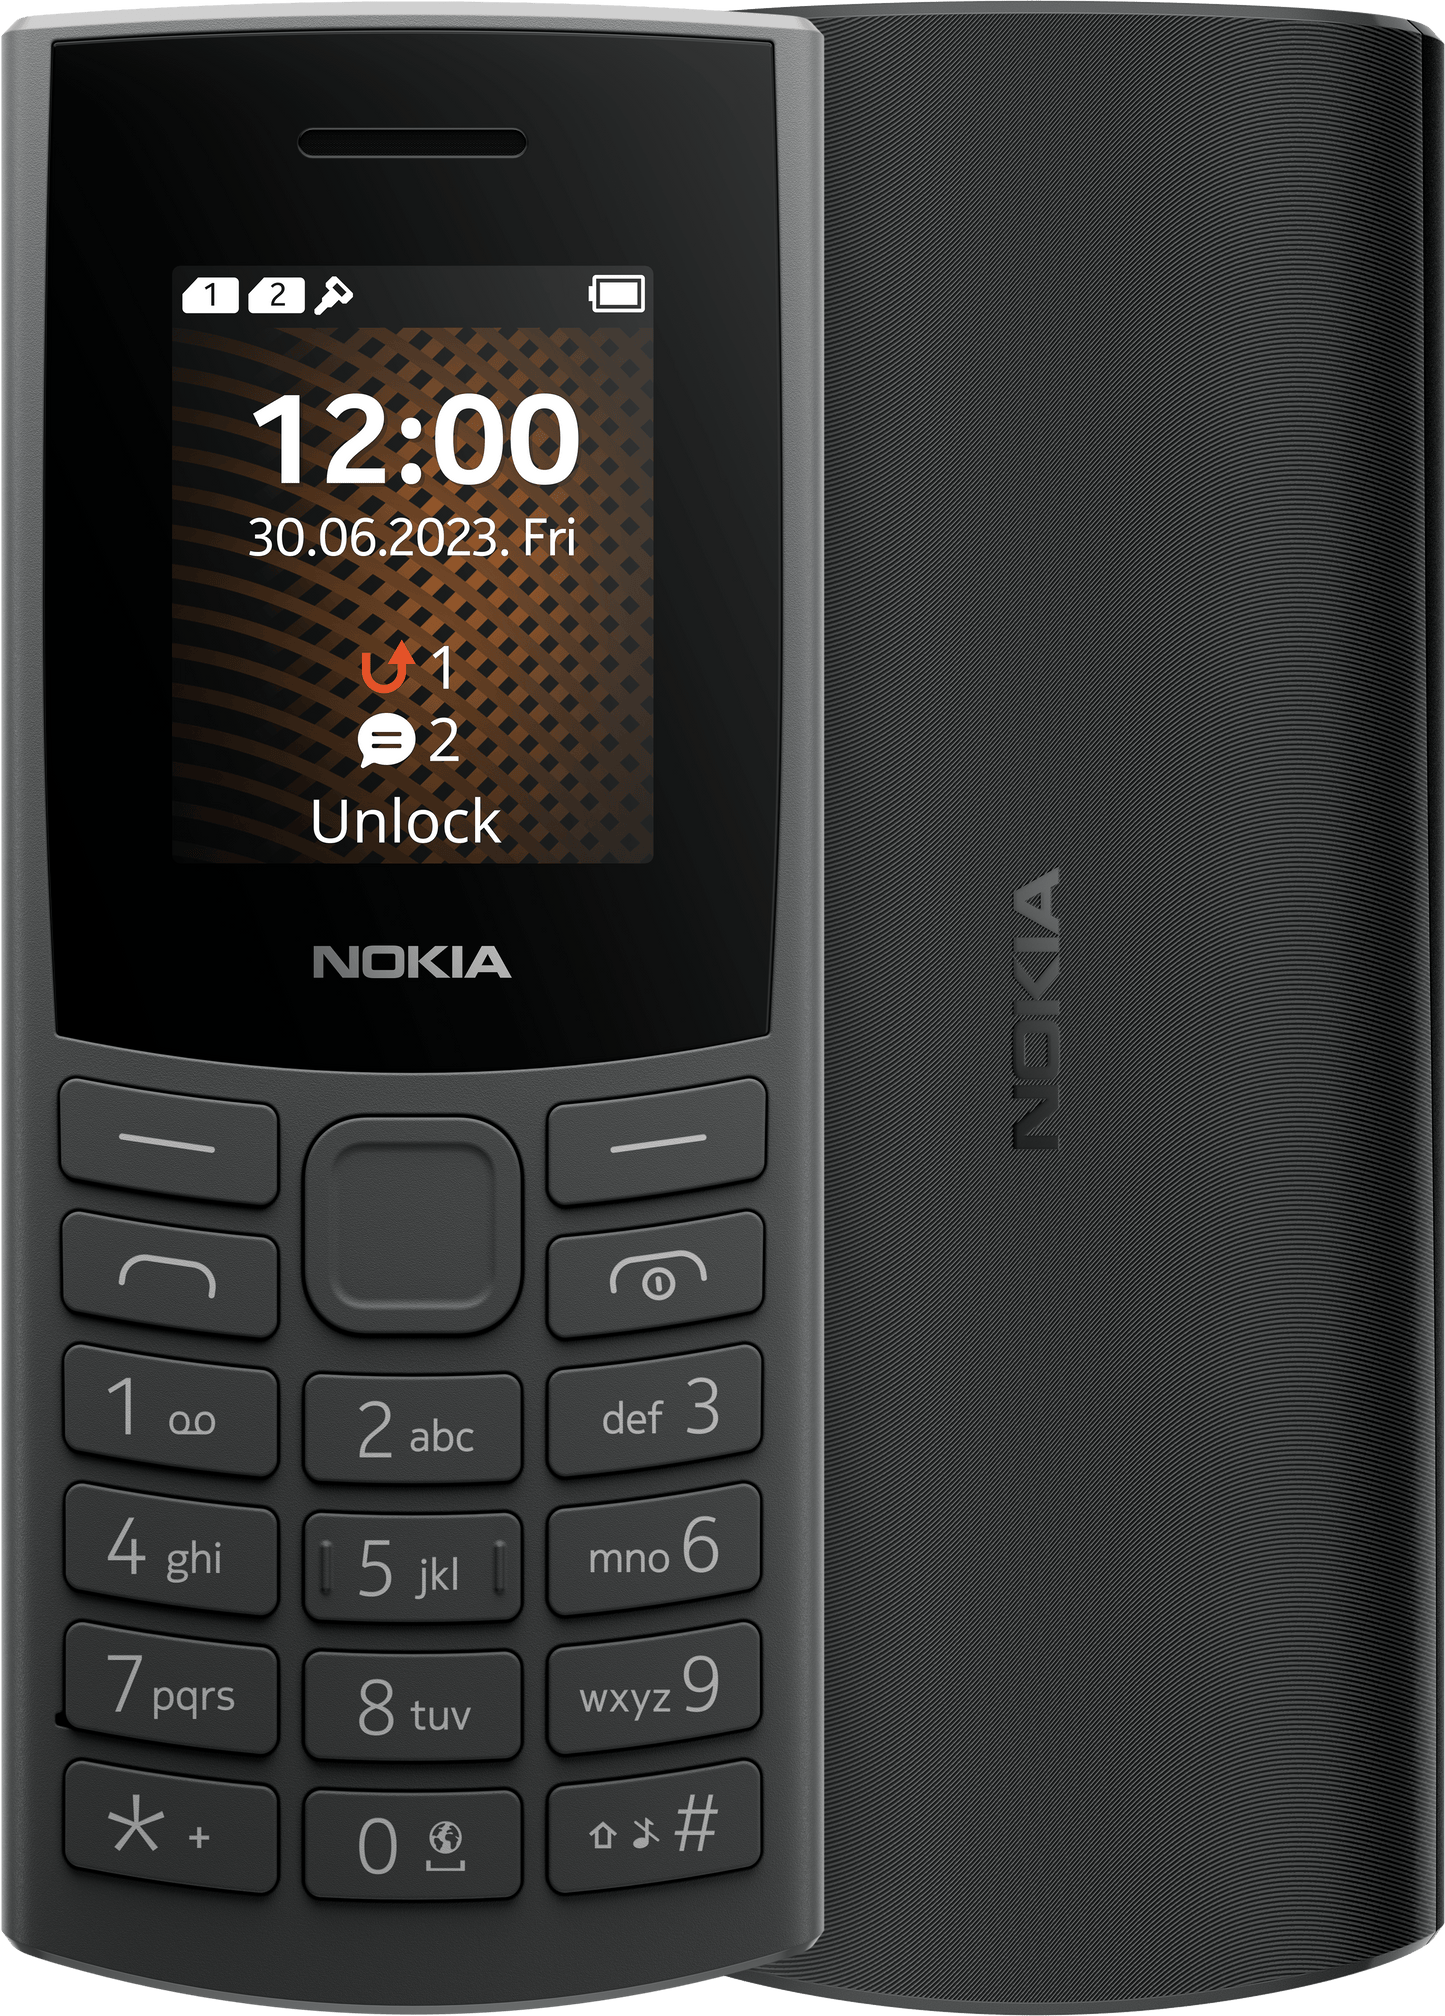 NEW - Nokia 105 4G 2023, Dual Sim 1.8 Inch S30+ Feature Phone with 4G Connectivity, 128MB + 48MB Storage, 1020mAh Removable Battery, FM Radio (Wired and Wireless Dual Mode) and 3-in-1 Speaker - Black